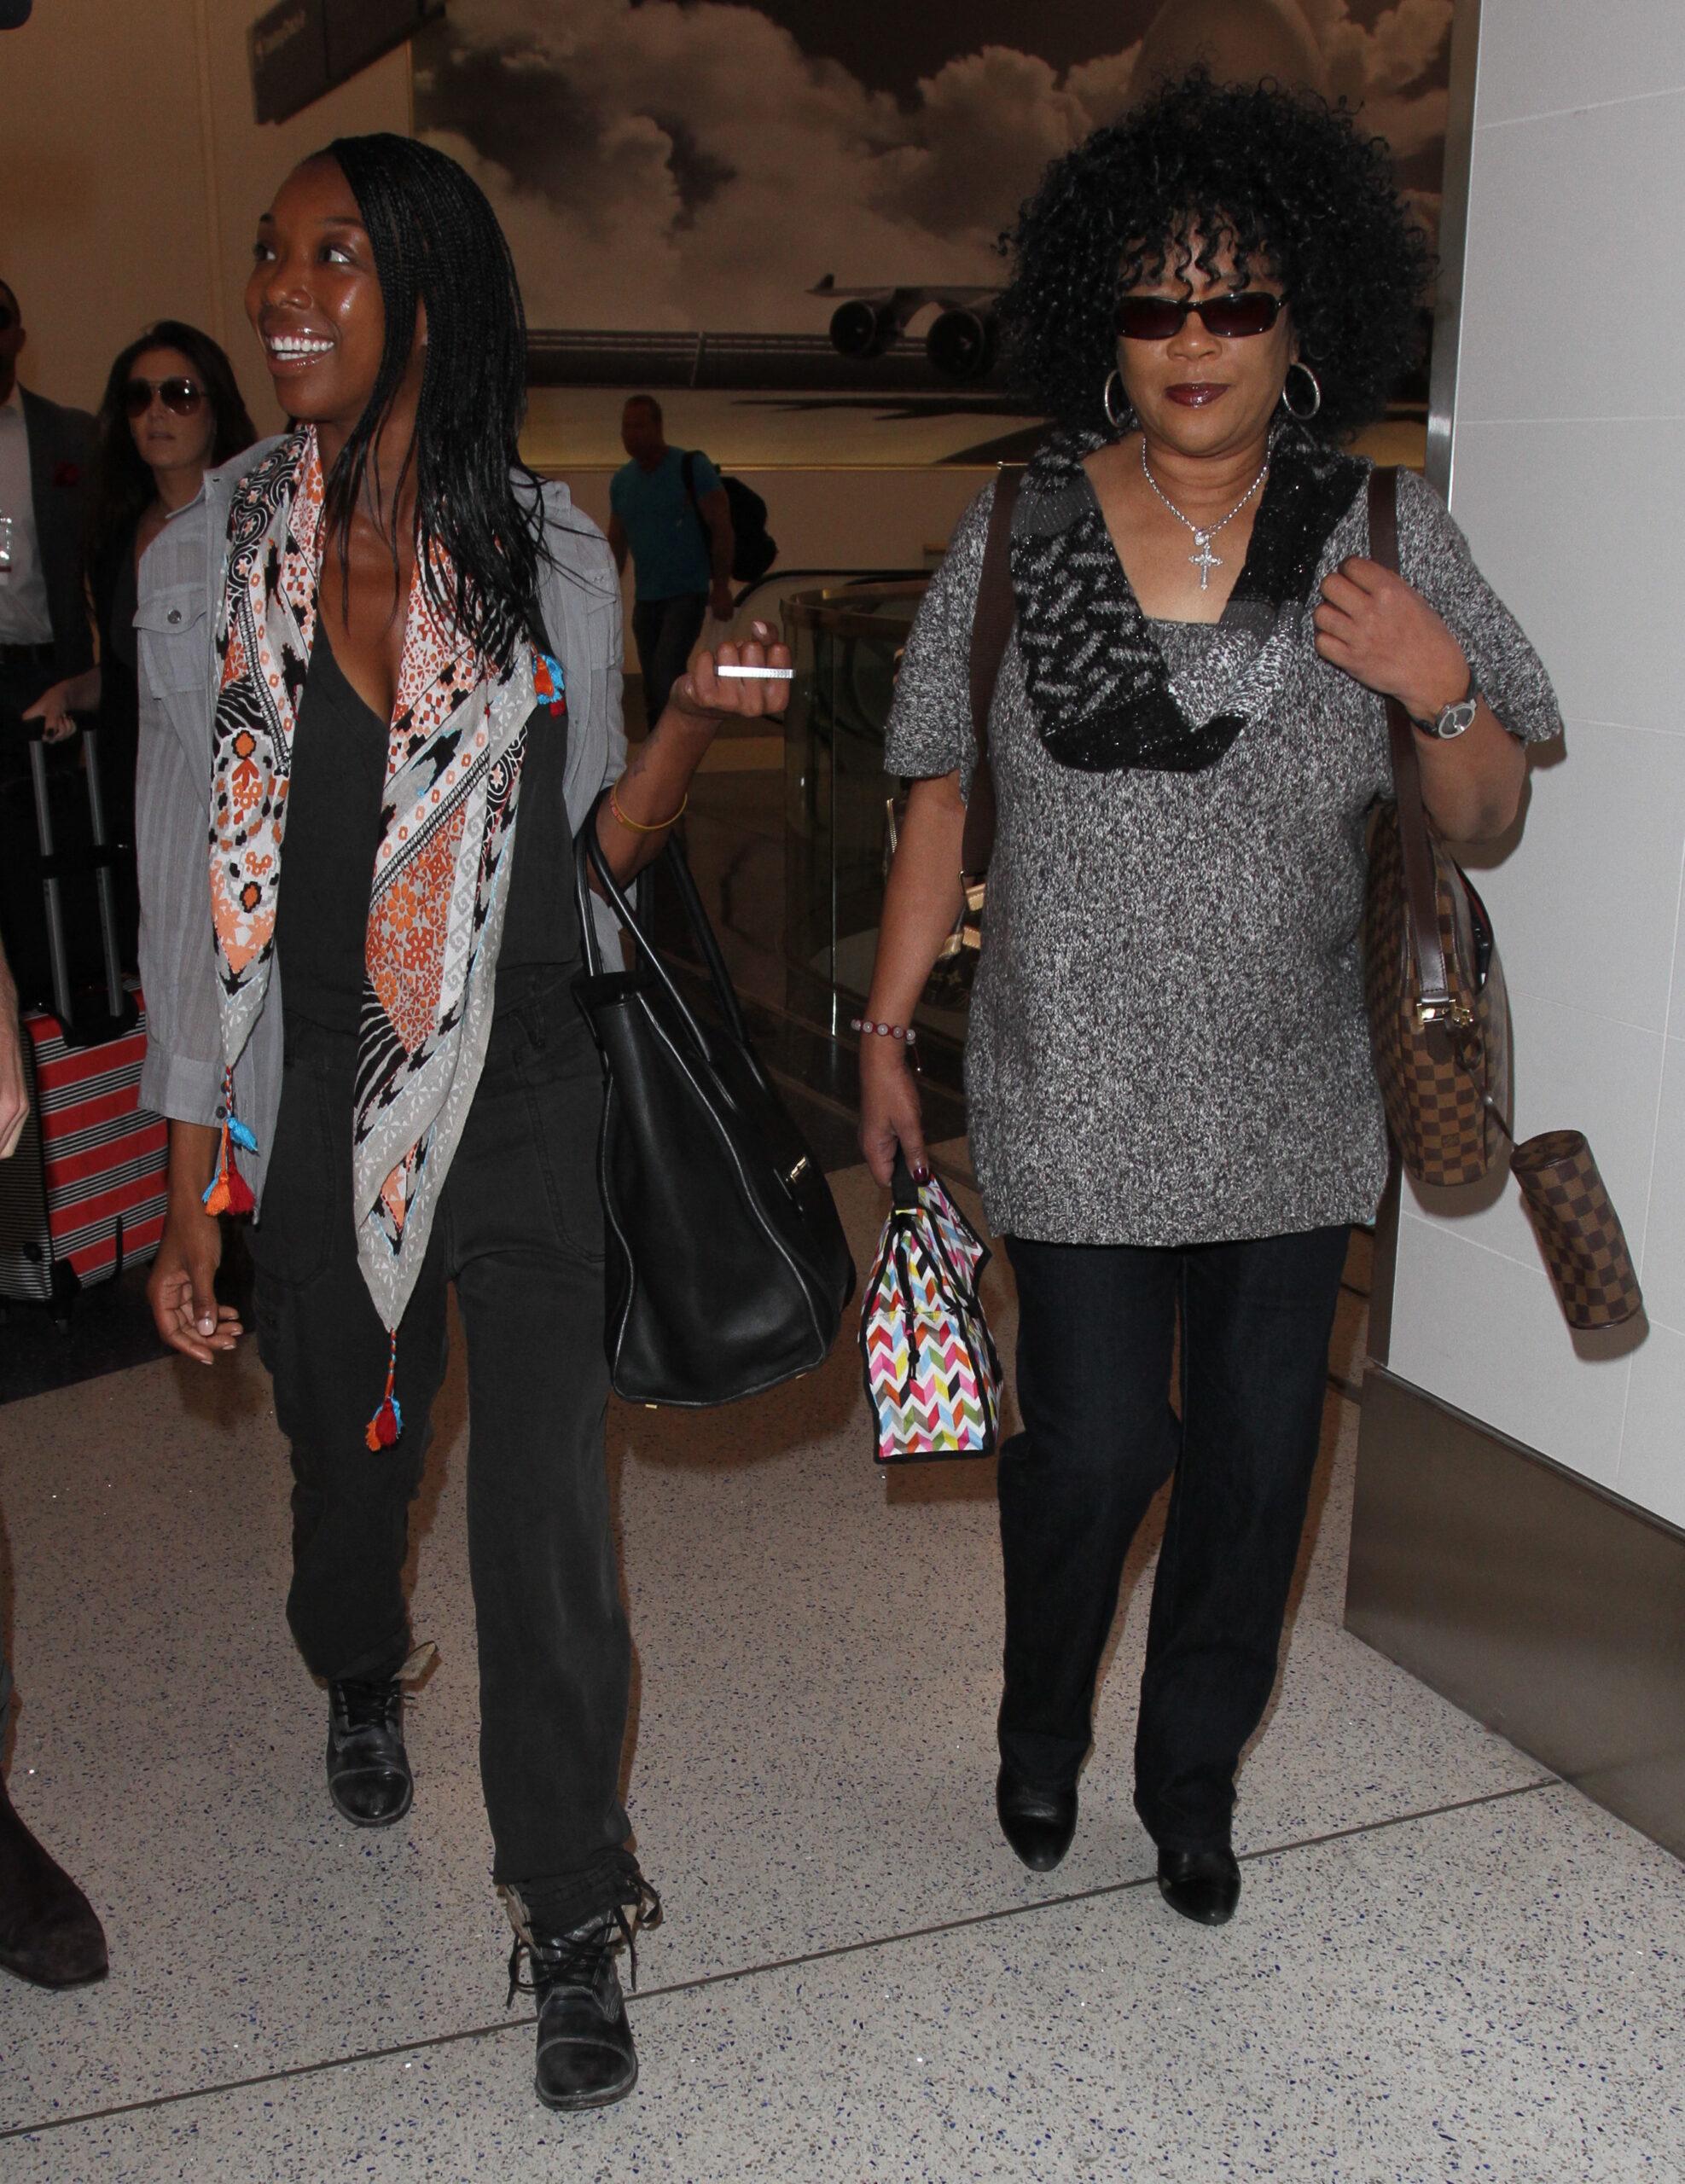 Brandy Norwood arrives with her mom at LAX